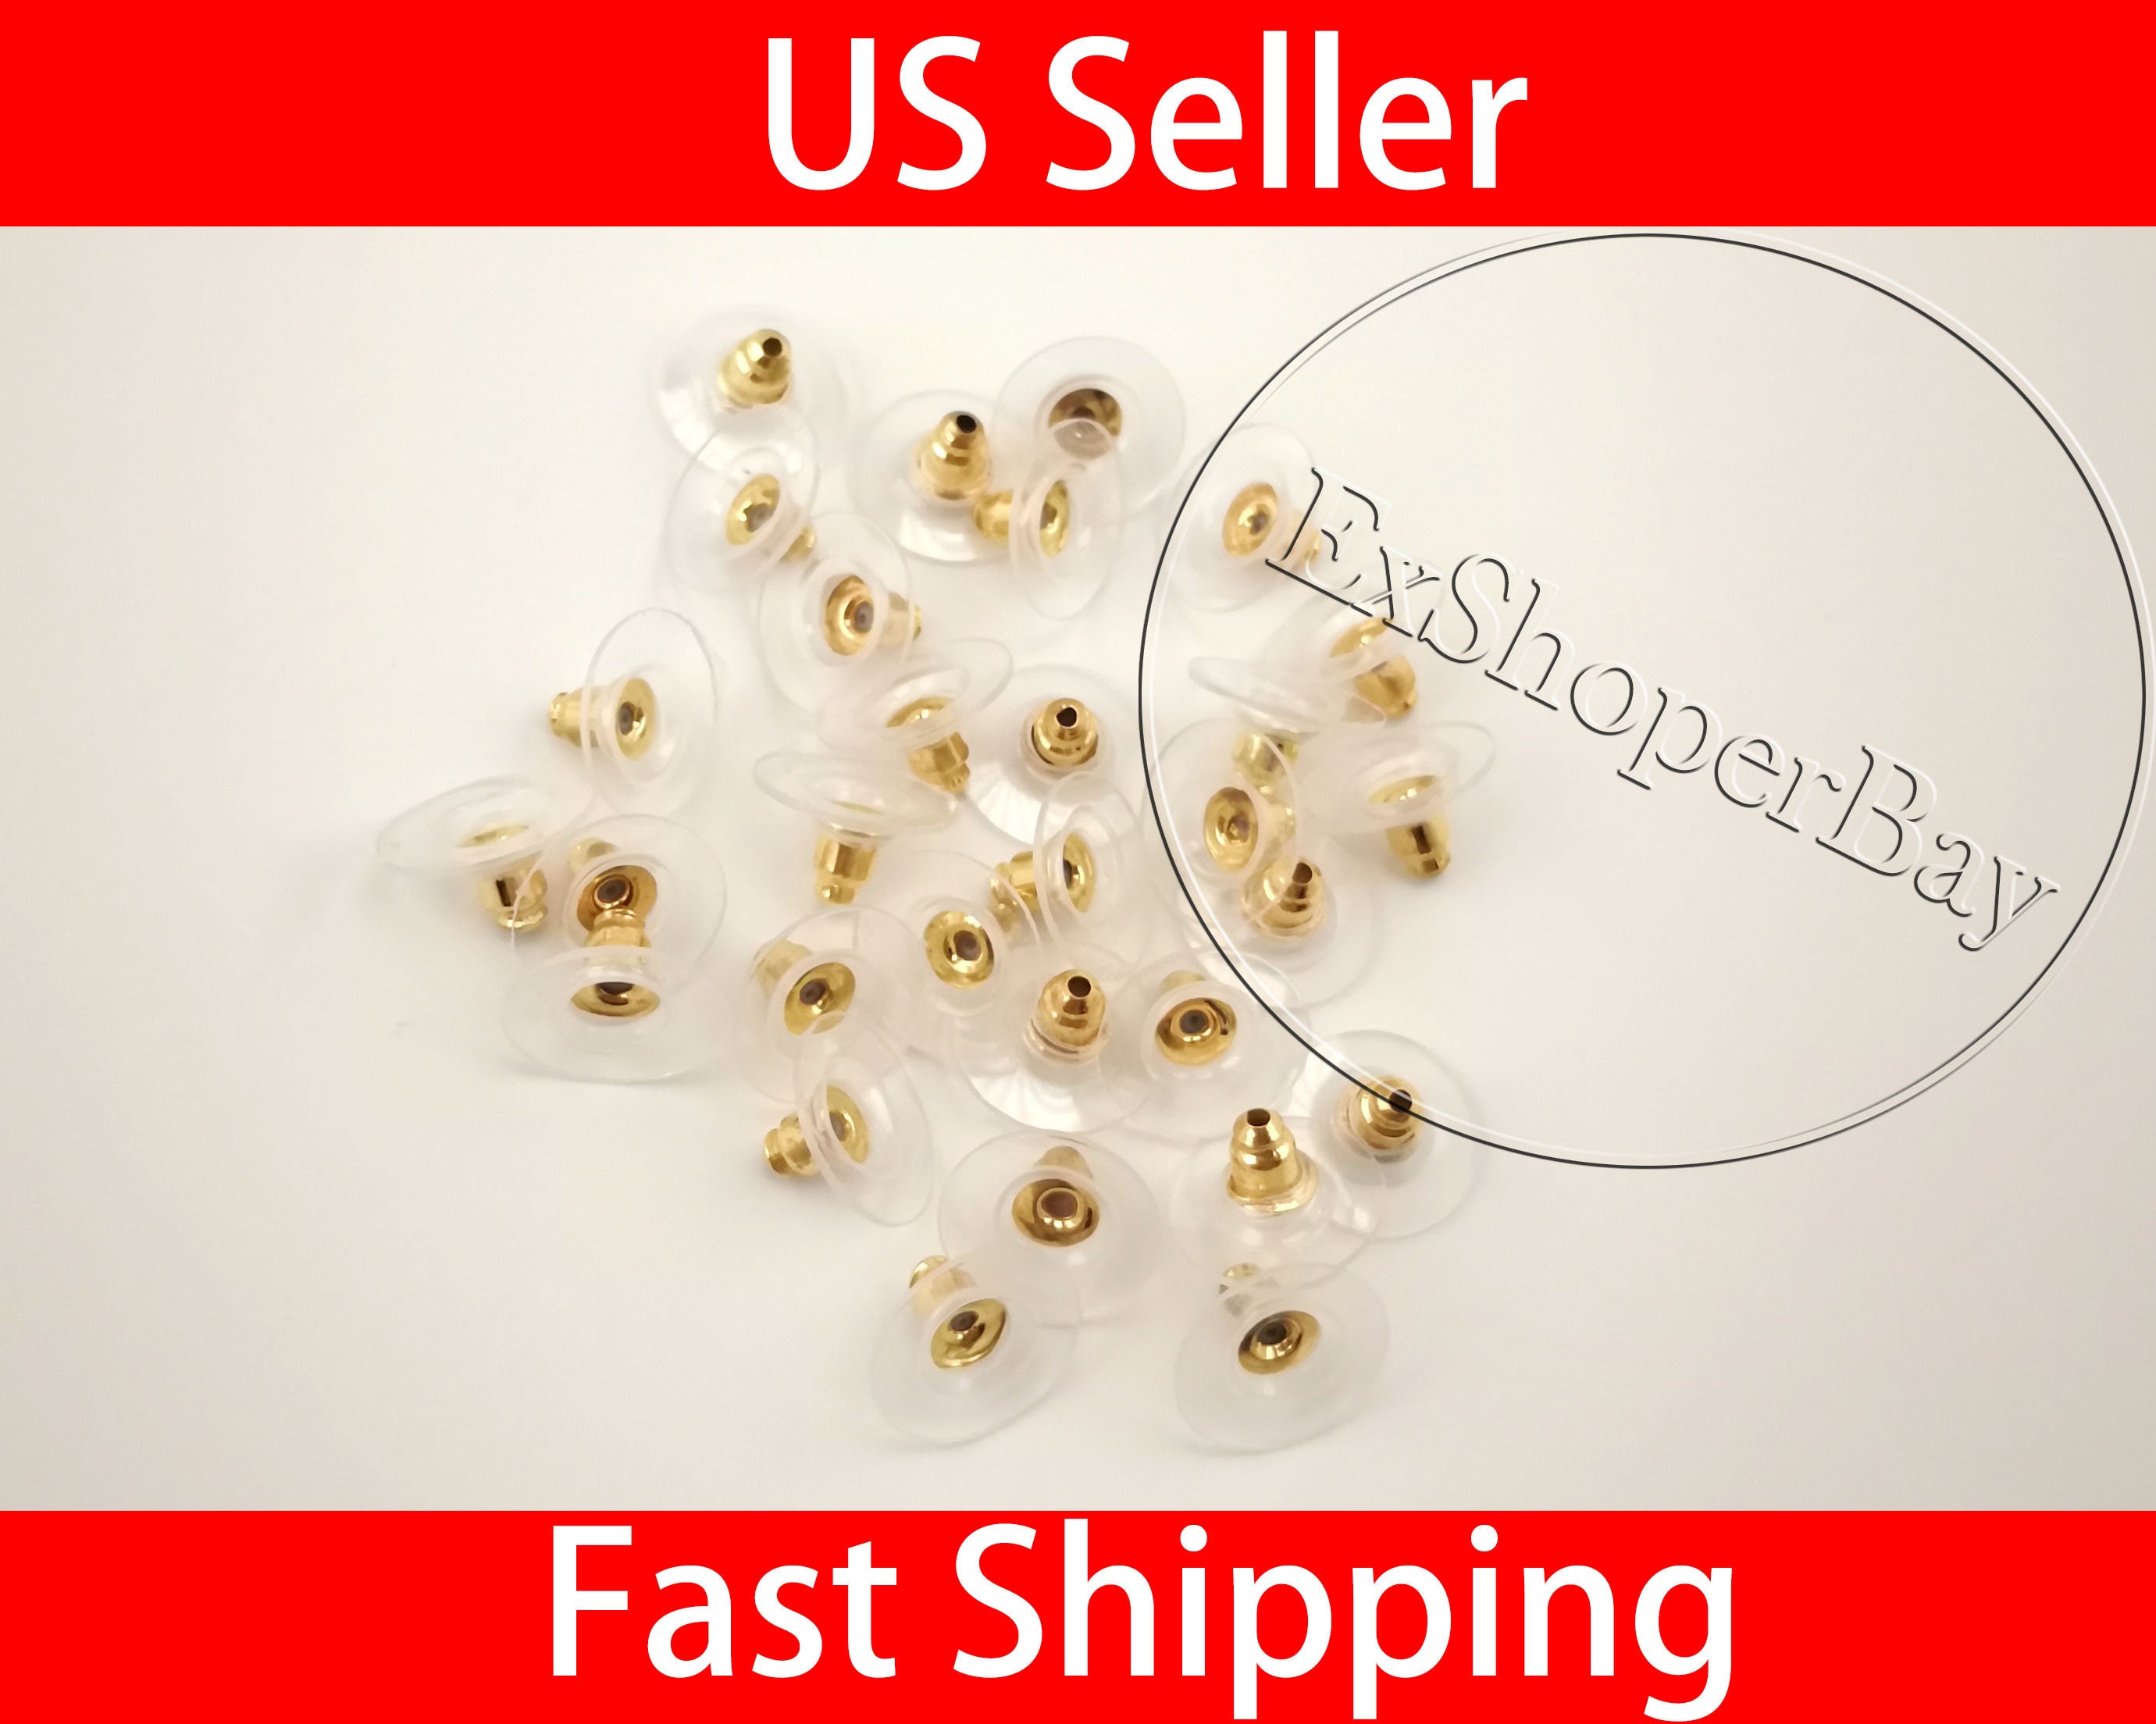 48 Clear Plastic Earring Posts, Invisible Earring Findings, Studs With  Backs, Makes 24 Pairs of Earrings, Jewelry Supplies 